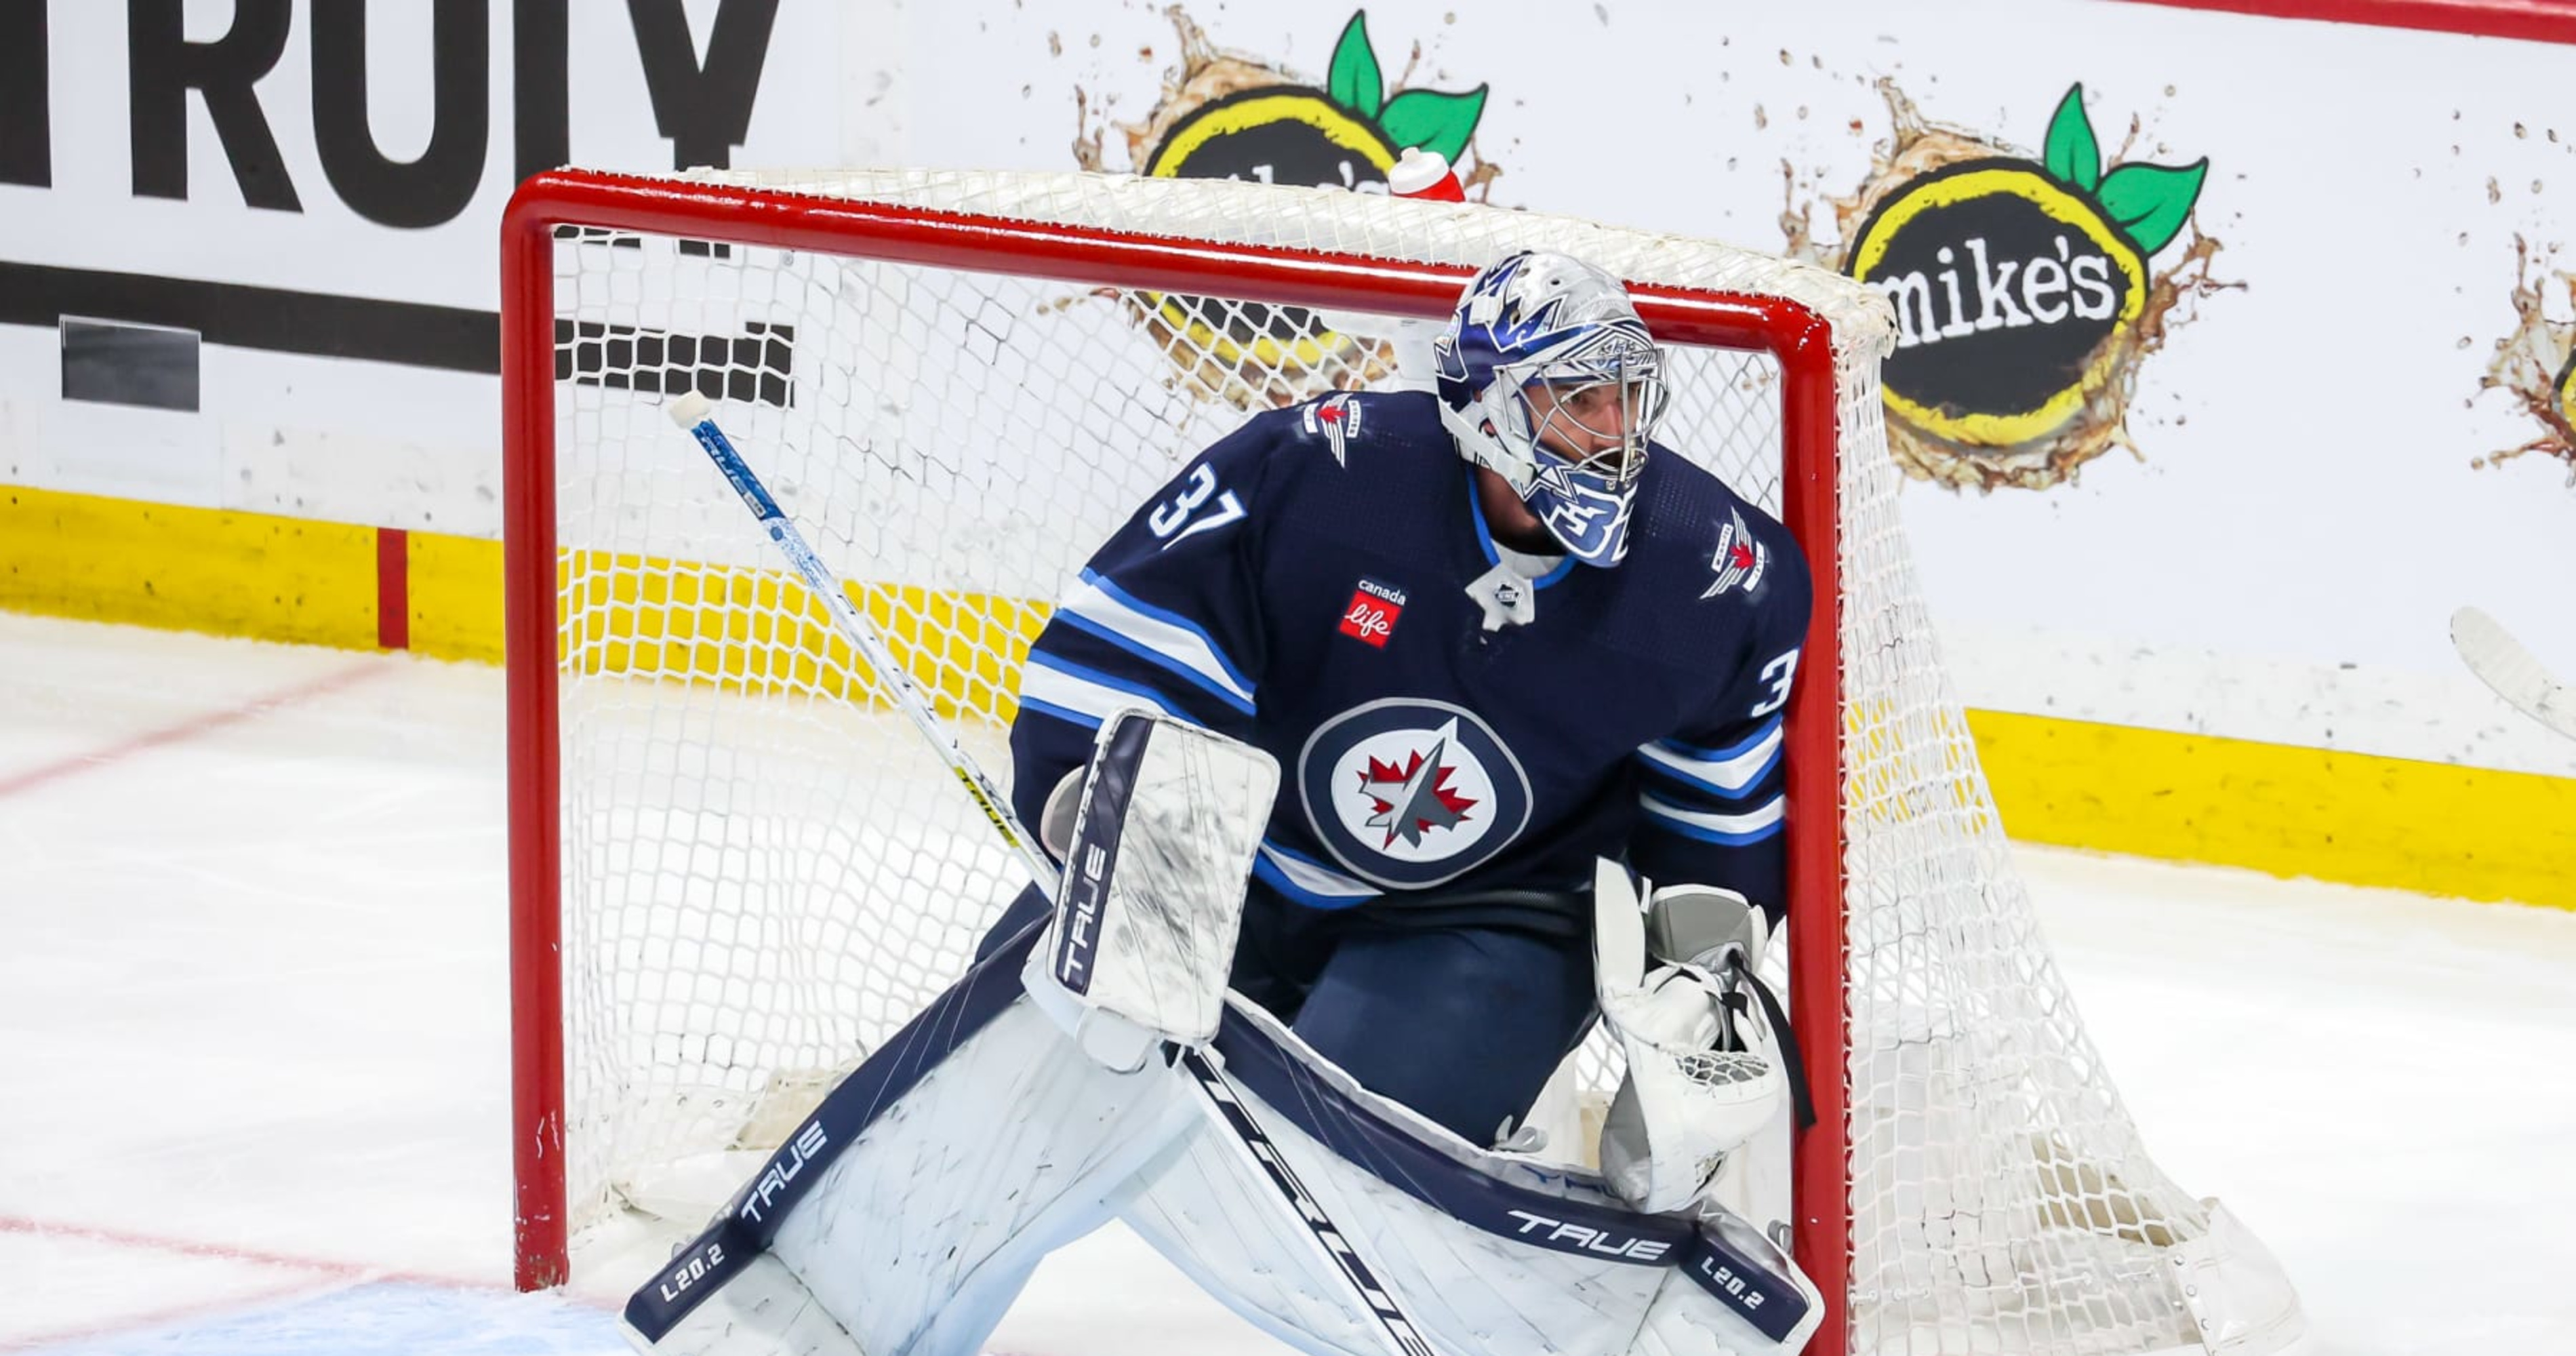 New Jersey Devils: Is There Value in Targeting Connor Hellebuyck?